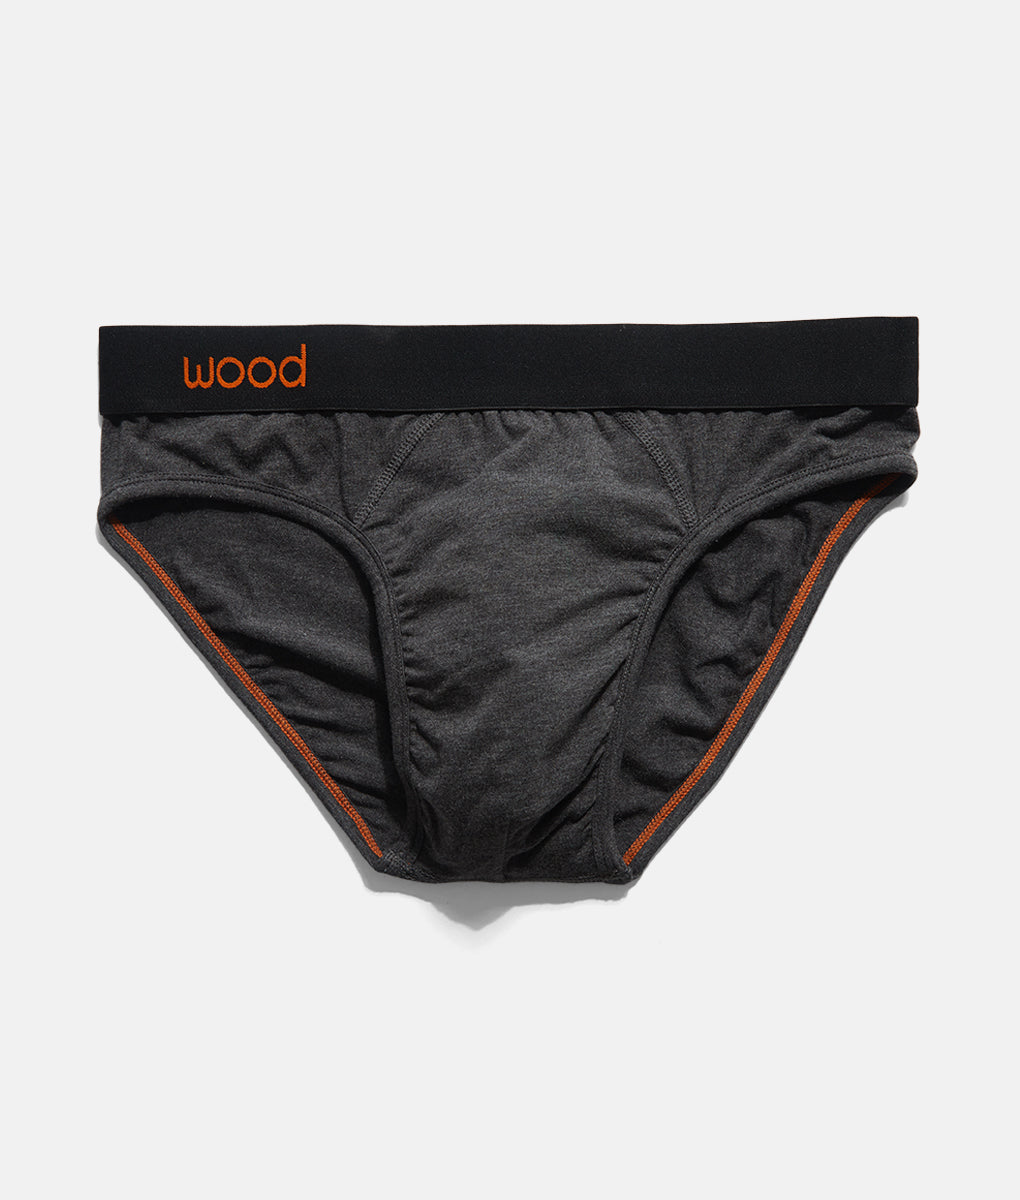 Buy Wood Underwear Boxer Brief (XX-Large, Charcoal) at